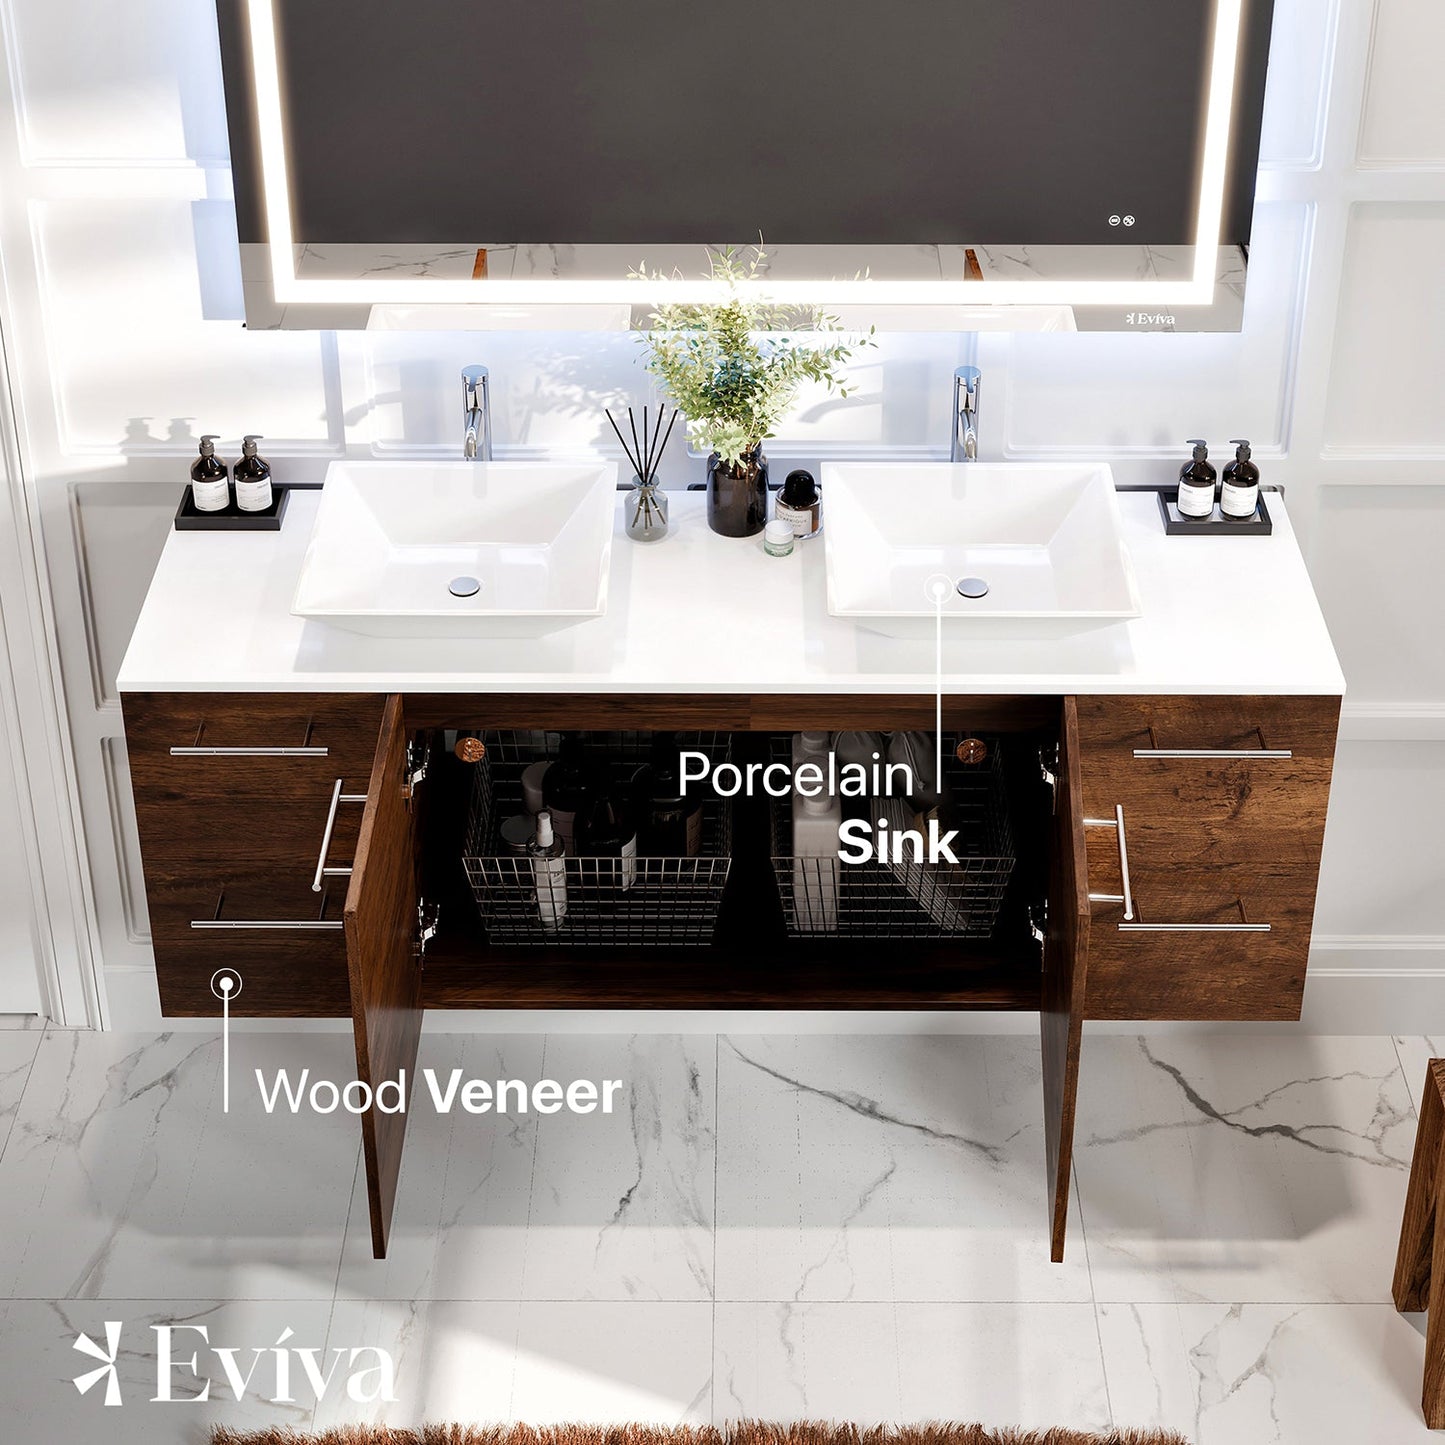 Luxurious 60"W x 22"D Rosewood Double Sink Wall Mount Bathroom Vanity with White Quartz Countertop and Vessel Porcelain Sink